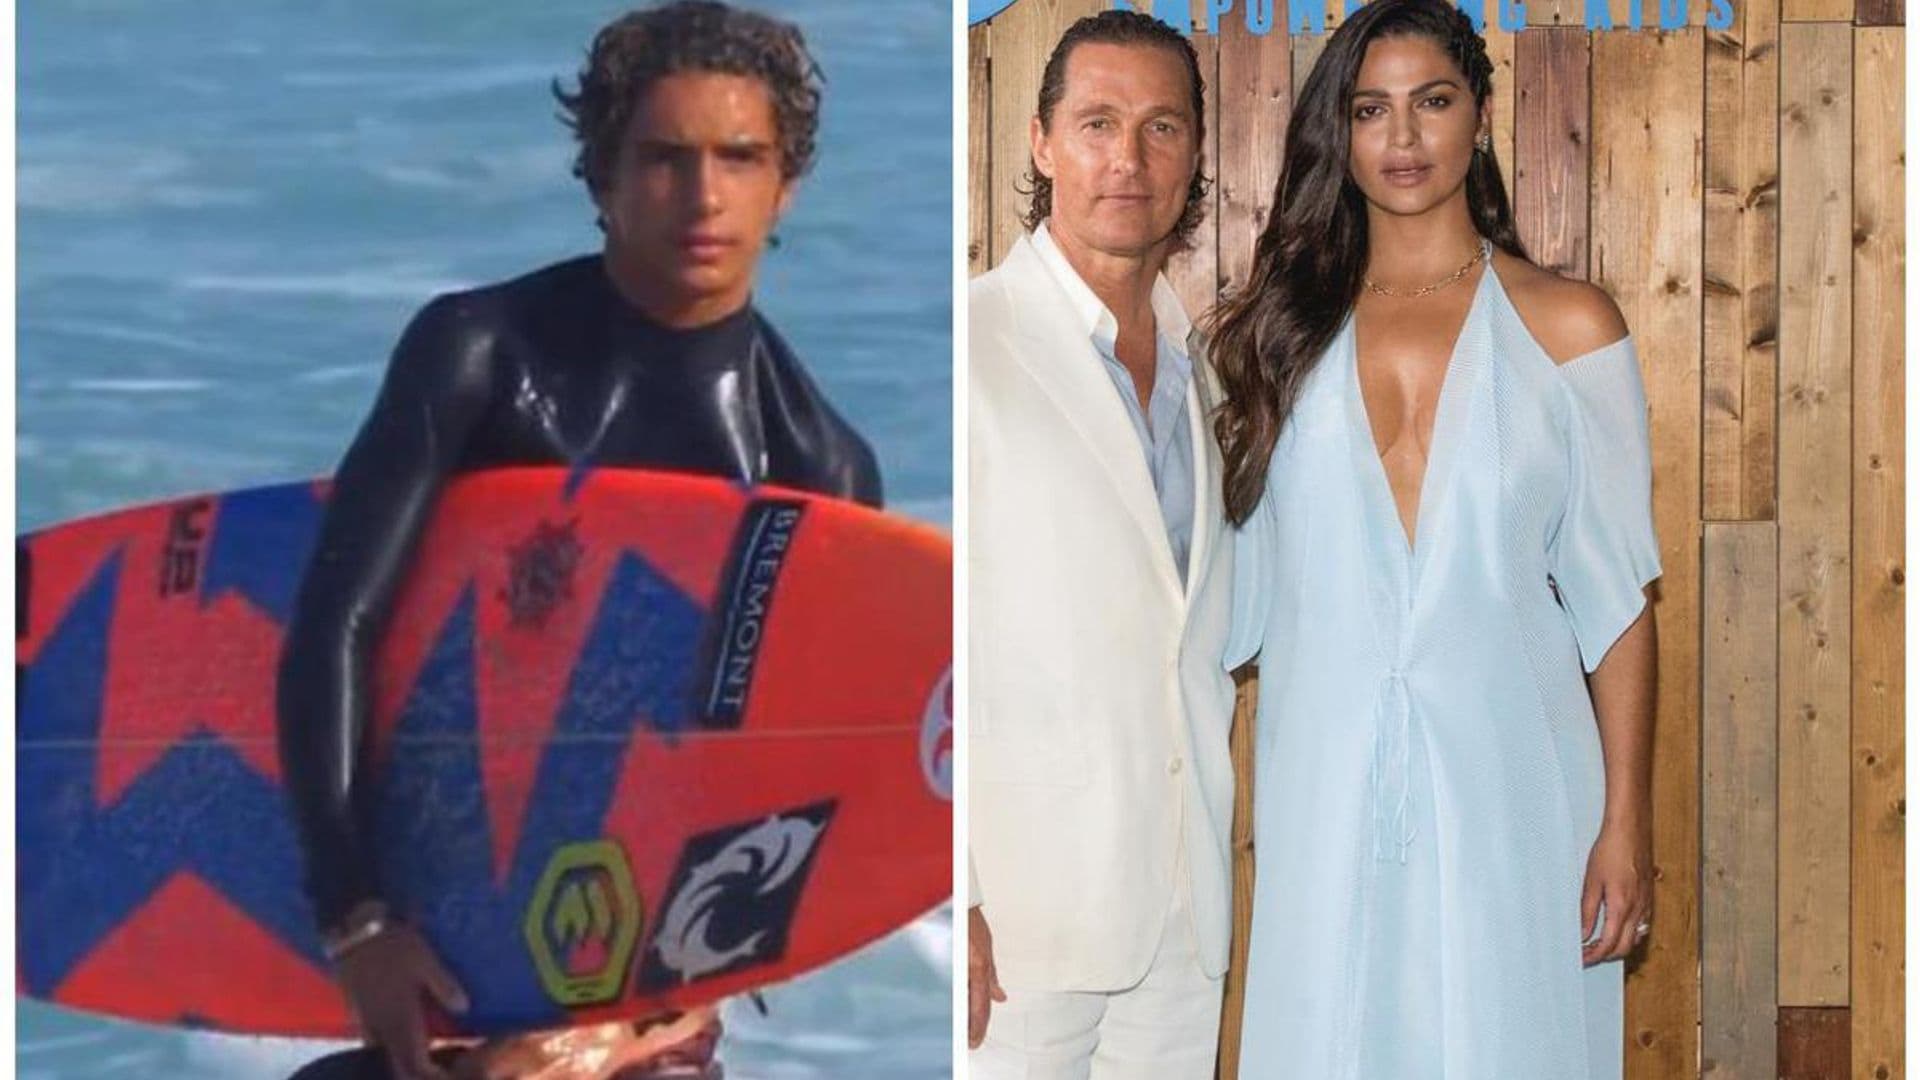 Matthew McConaughey and Camila Alves ask fans to be ‘respectful’ to son Levi as he joins social media